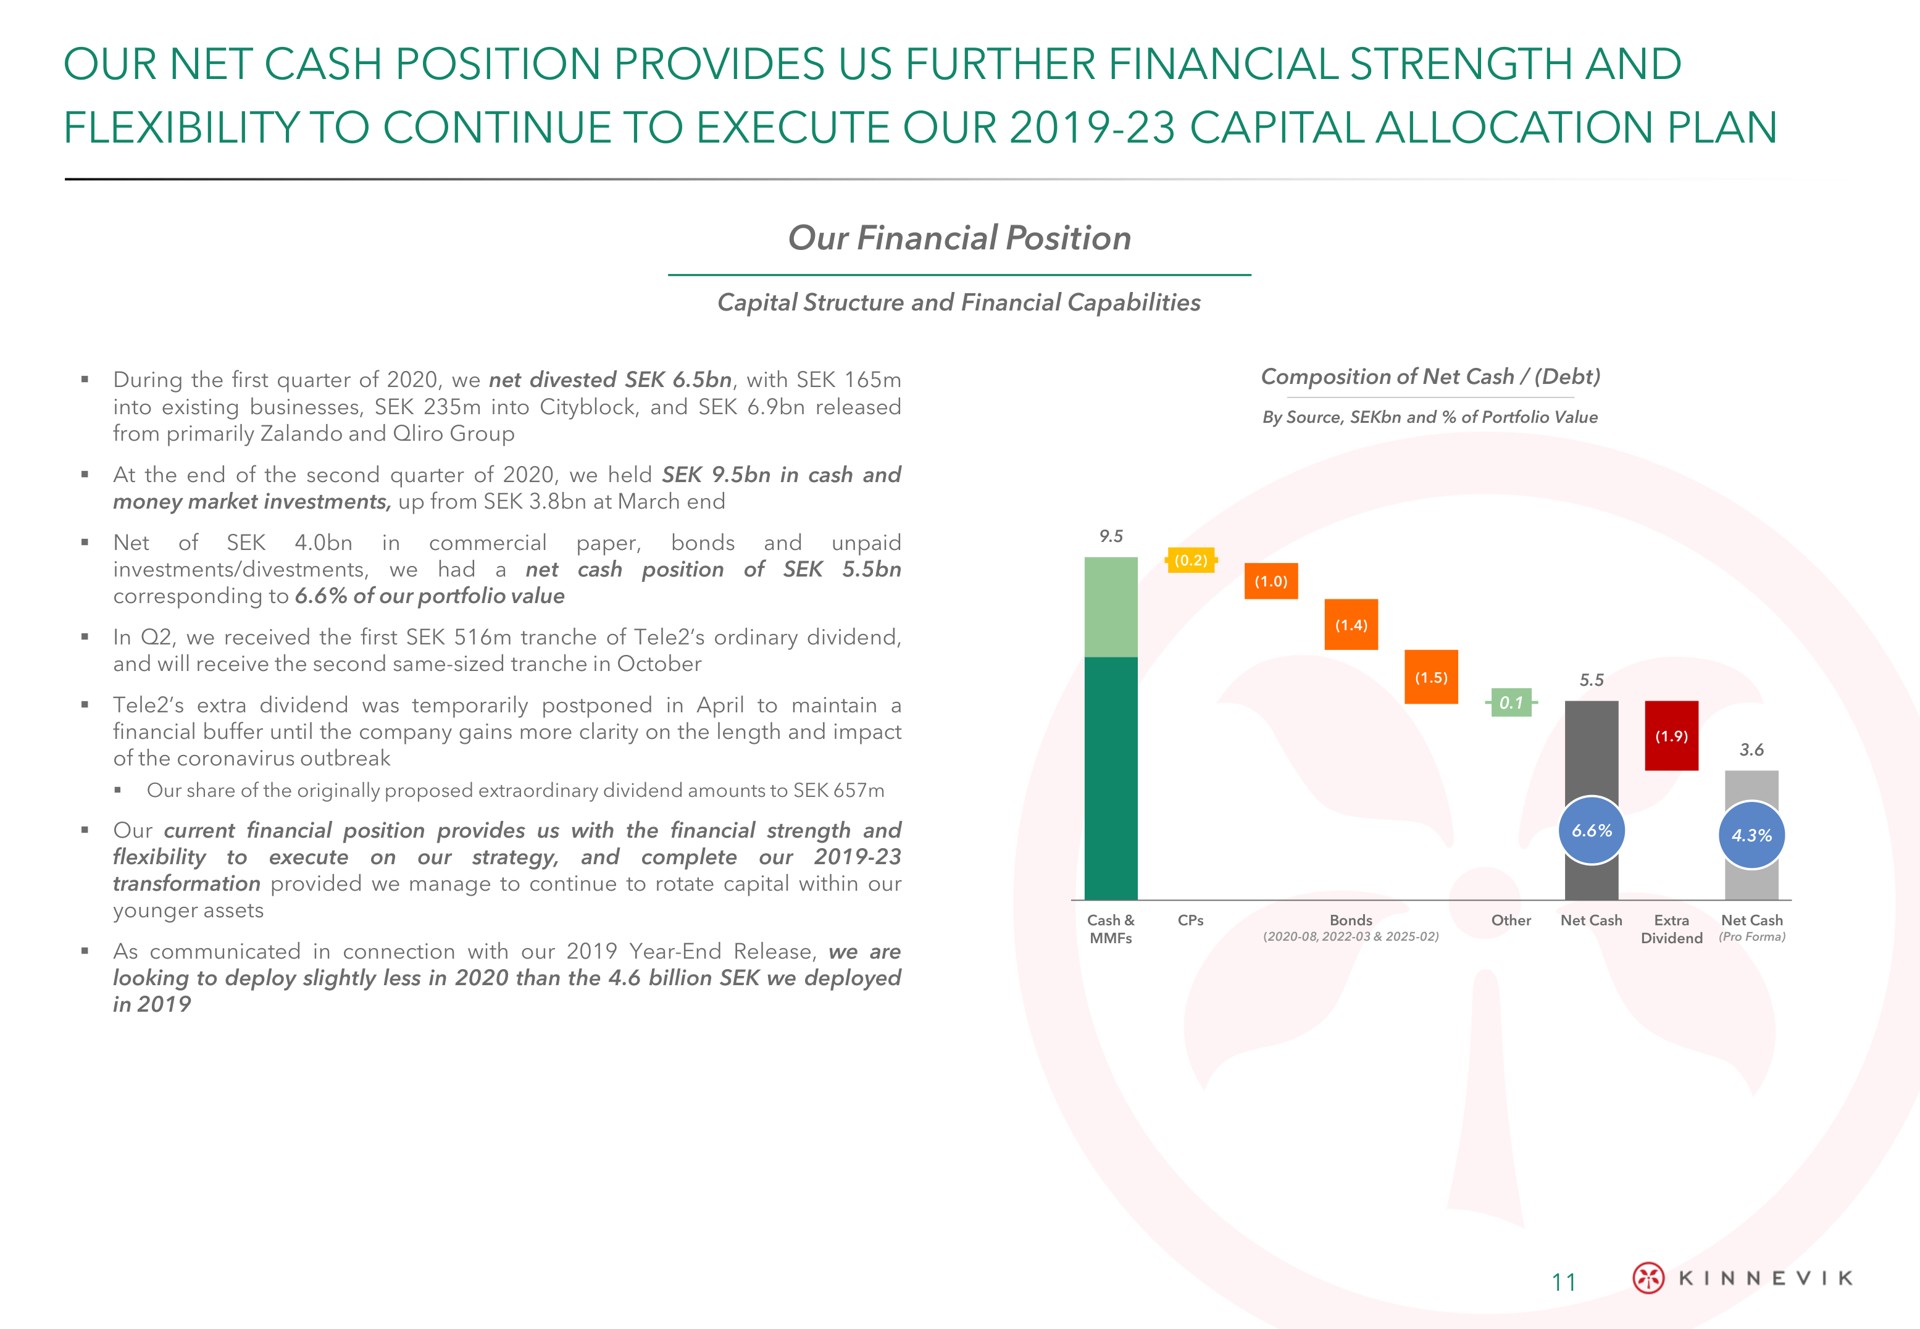 our net cash position provides us further financial strength and flexibility to continue to execute our capital allocation plan | Kinnevik